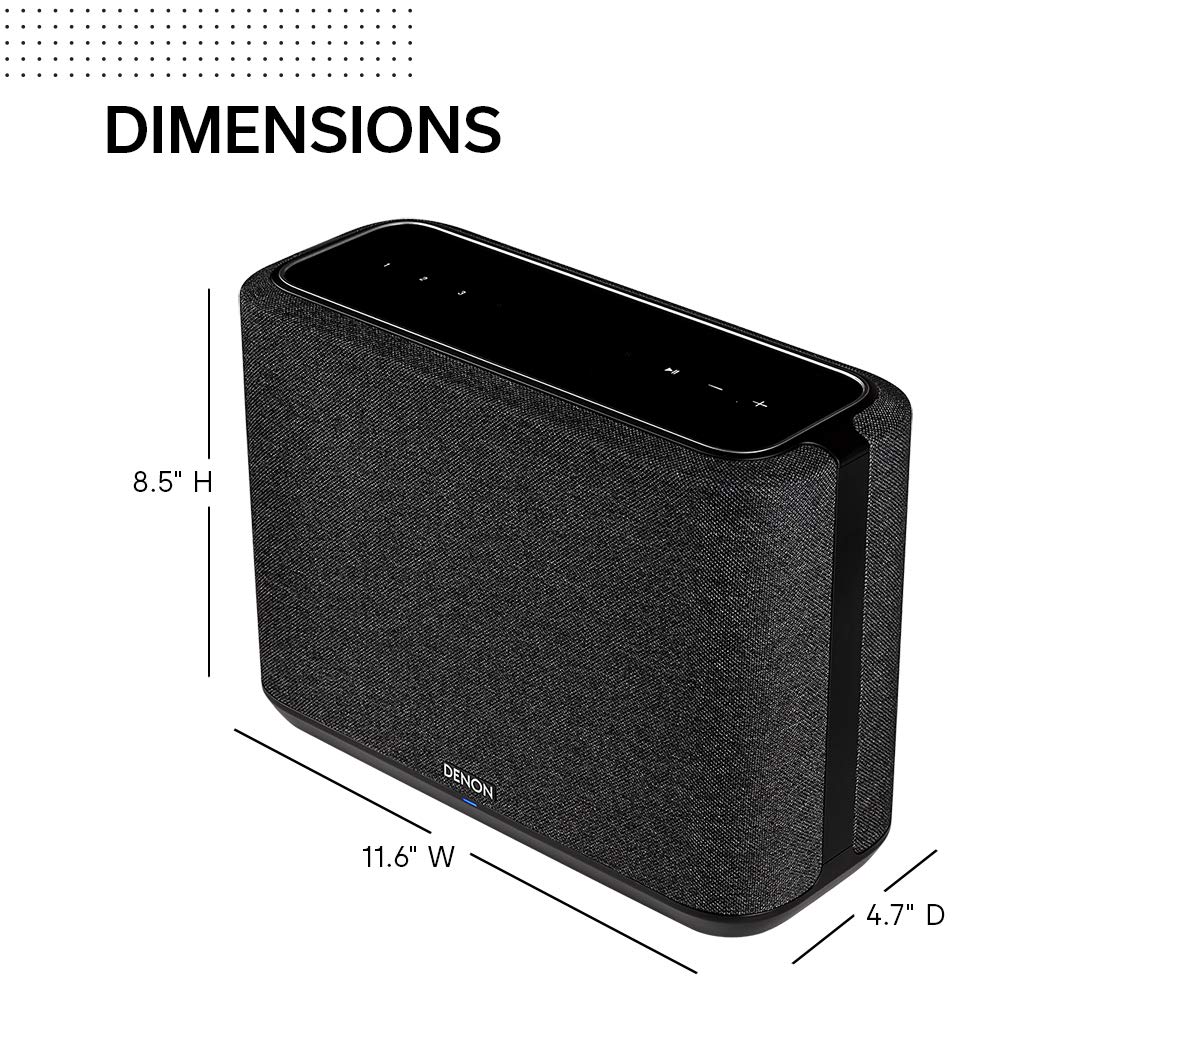 Denon Home 250 Wireless Speaker, HEOS and Alexa Built-in, AirPlay 2, and Bluetooth, Compact Design, Black